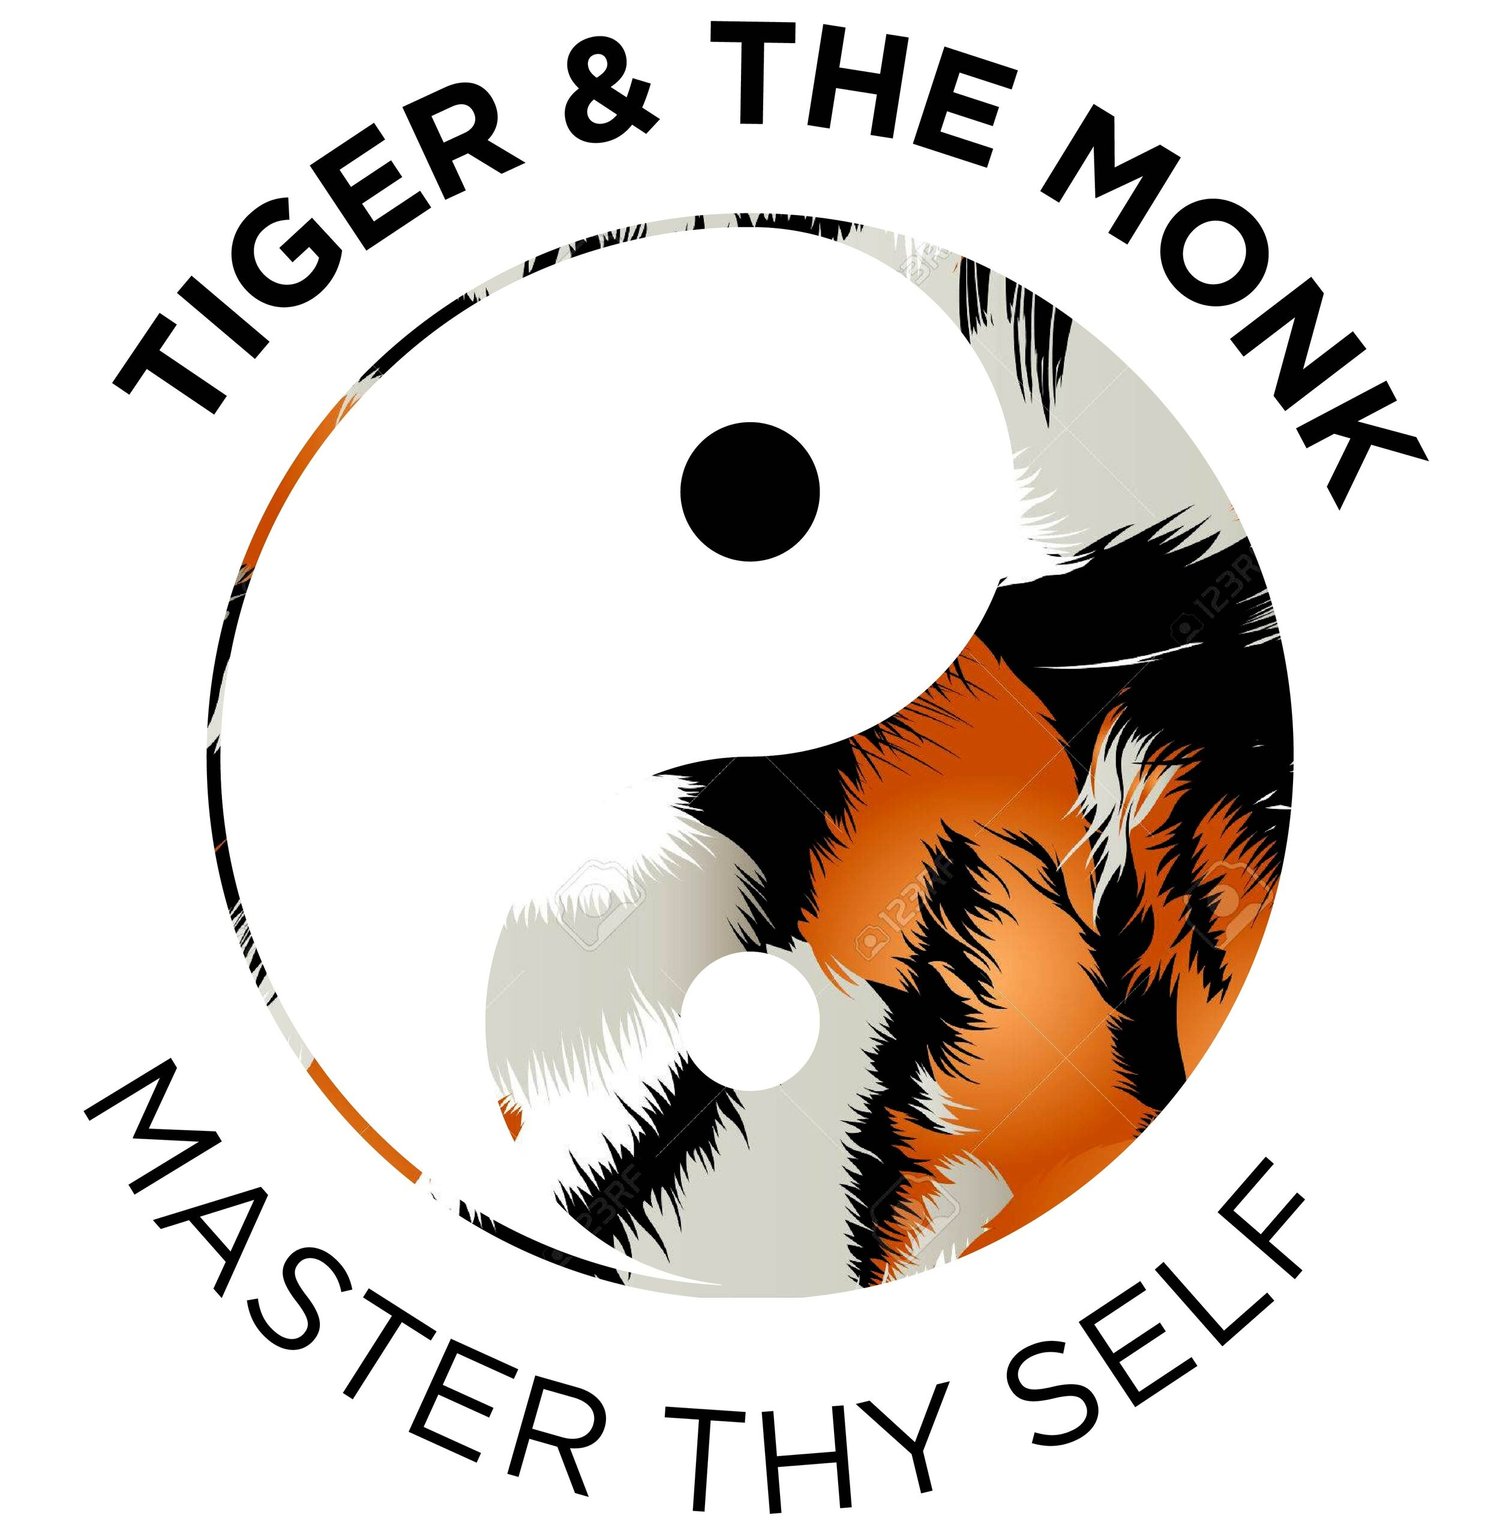 The Tiger and The Monk